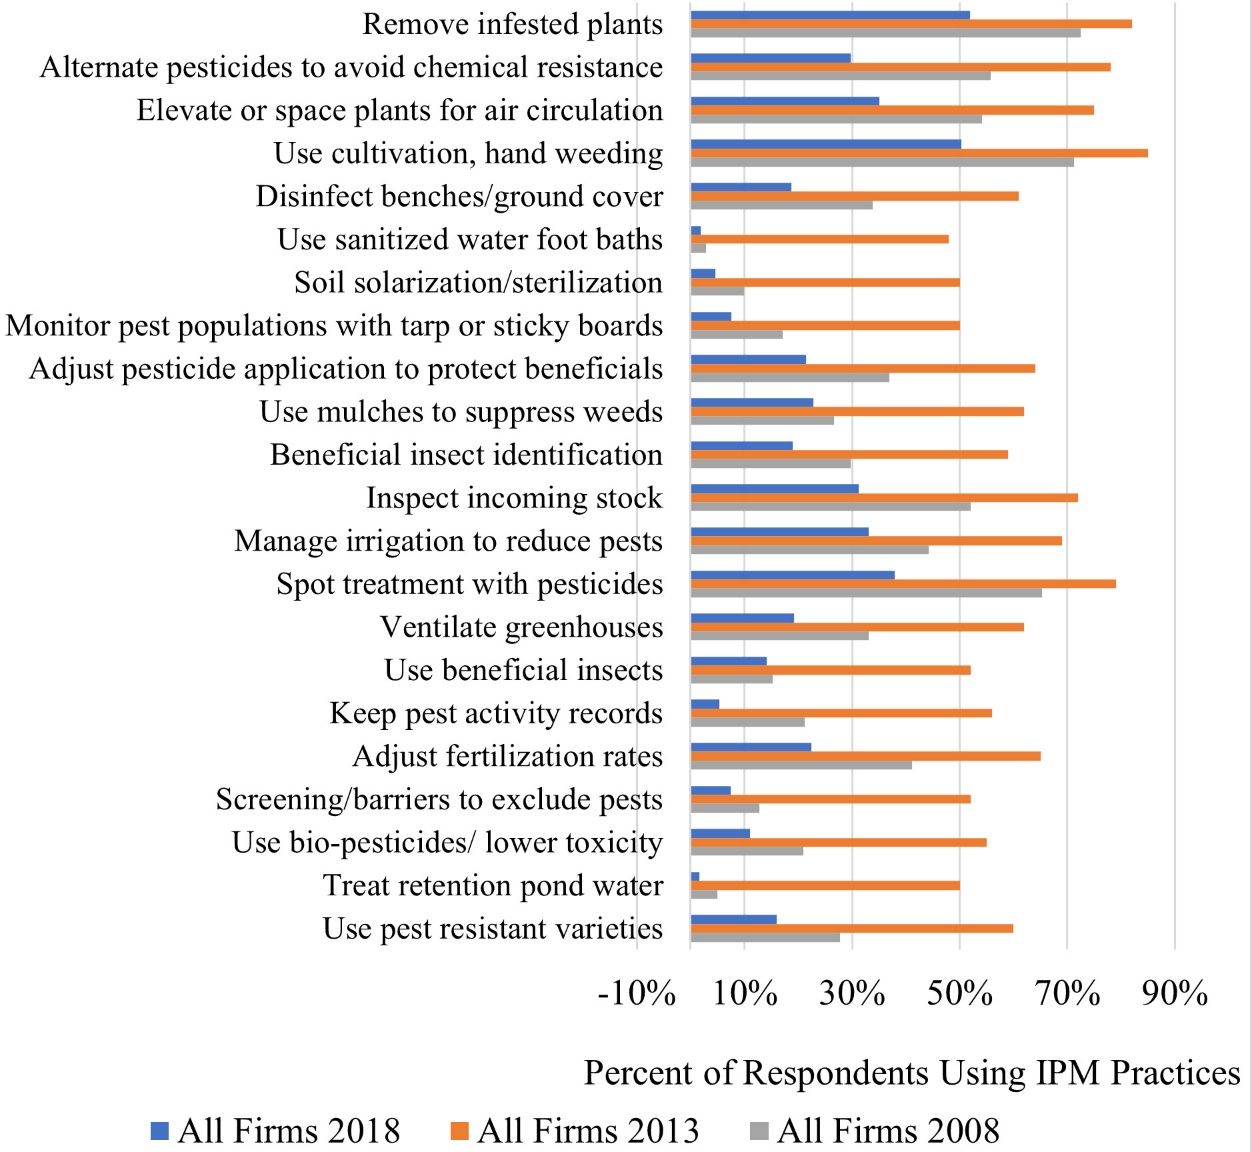 Integrated Pest Management (IPM) Practices Used From 2008 to 2018.